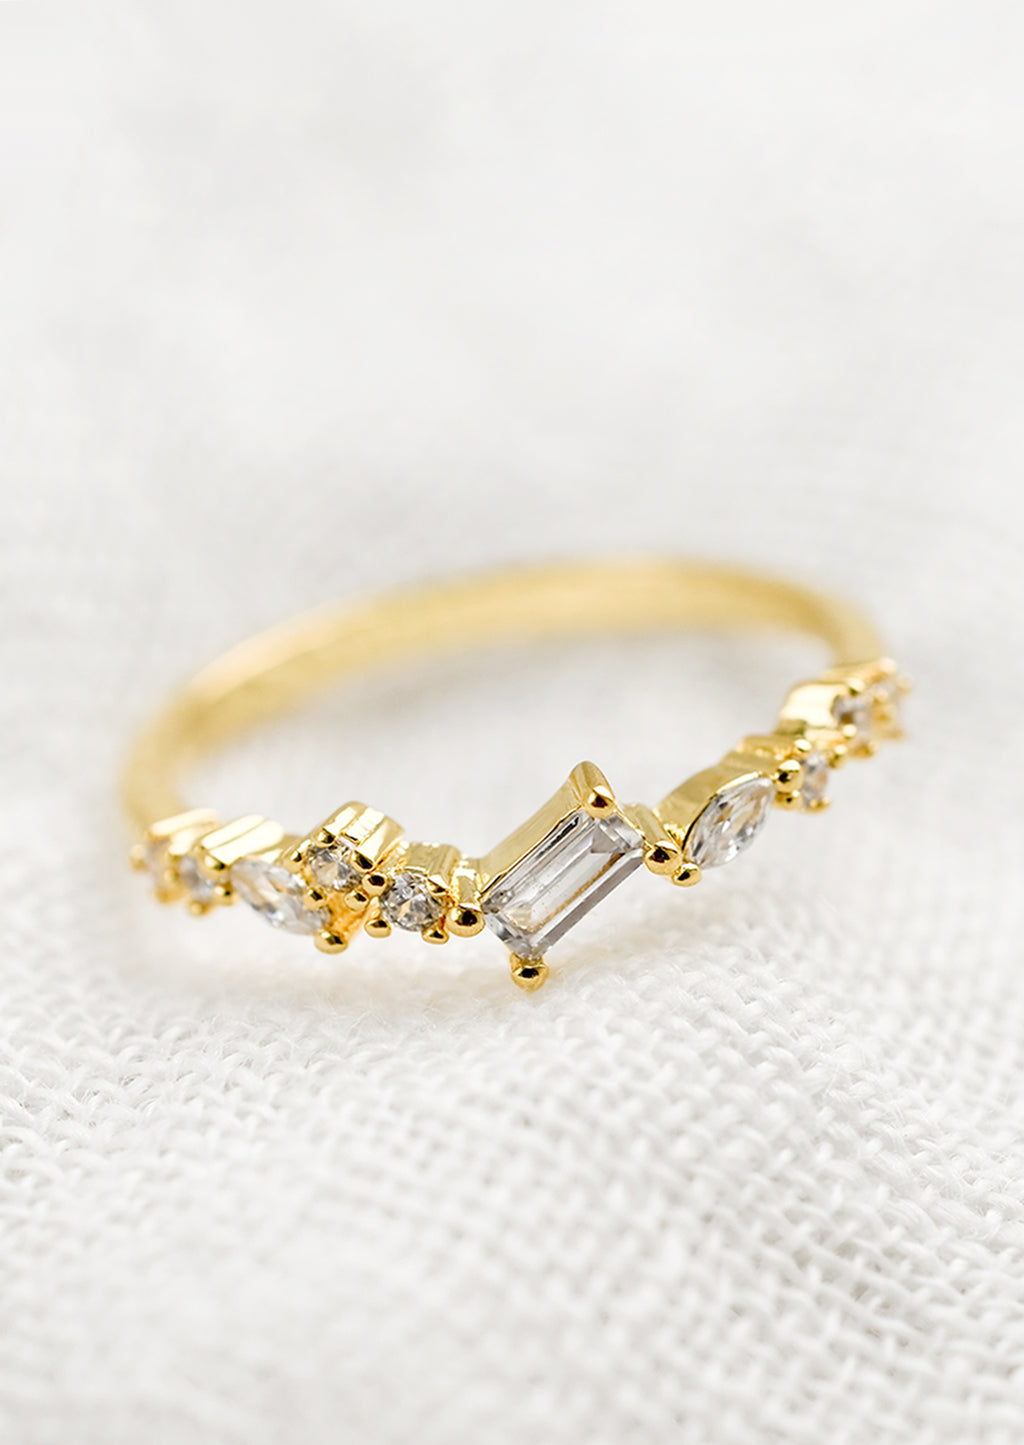 2: A gold ring with askew clear crystals in mixed cuts.